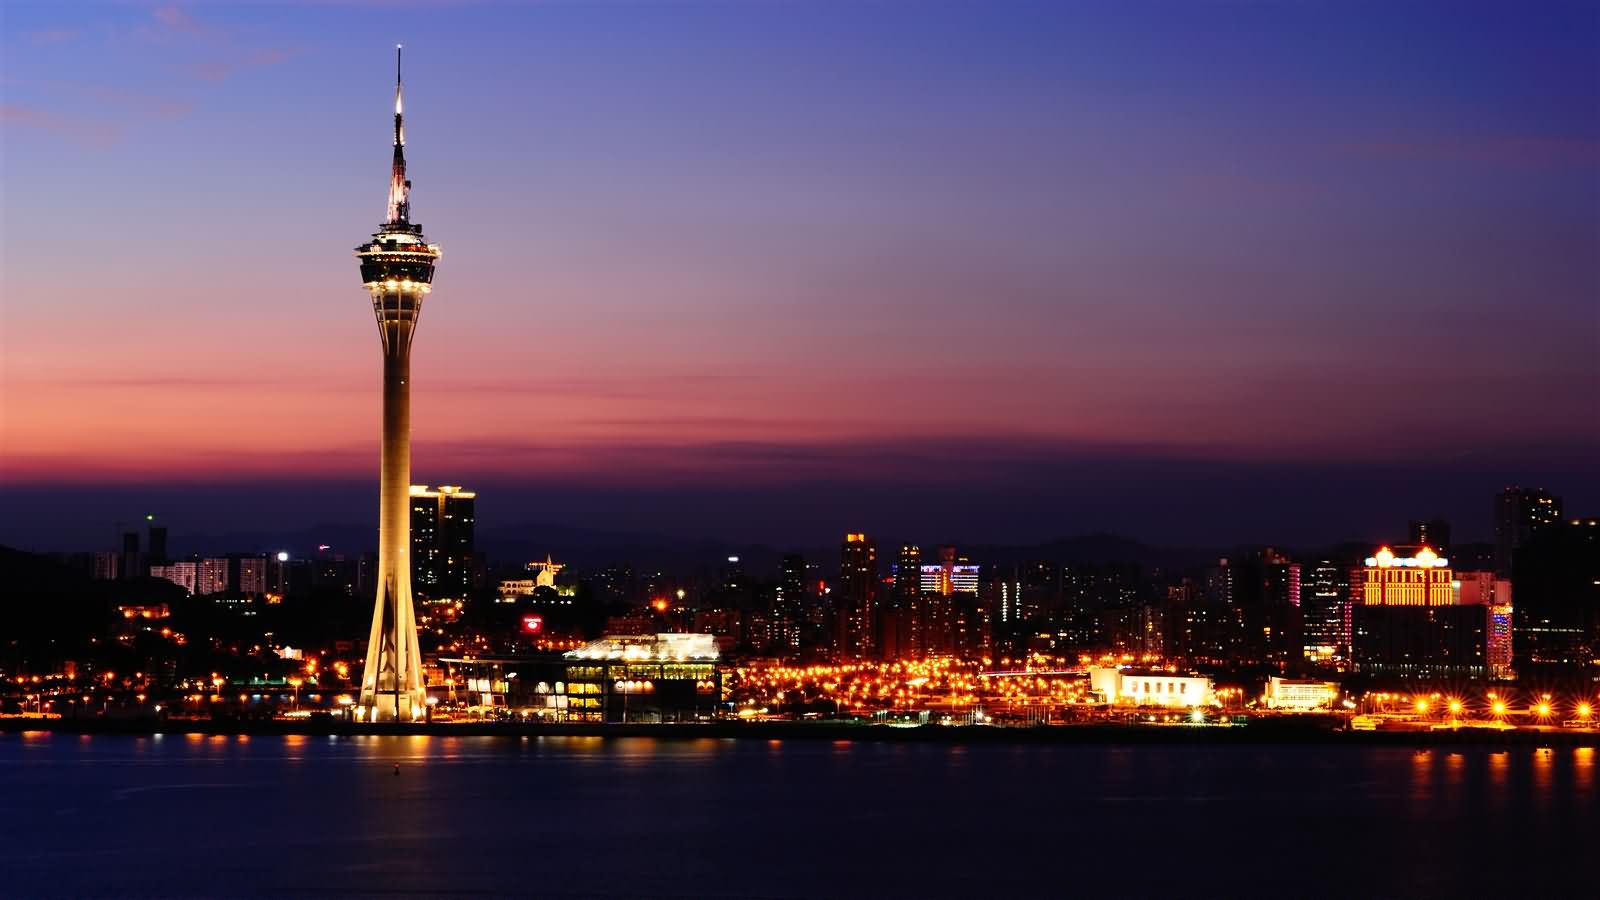 The Macau Tower And City Lit Up At Dusk